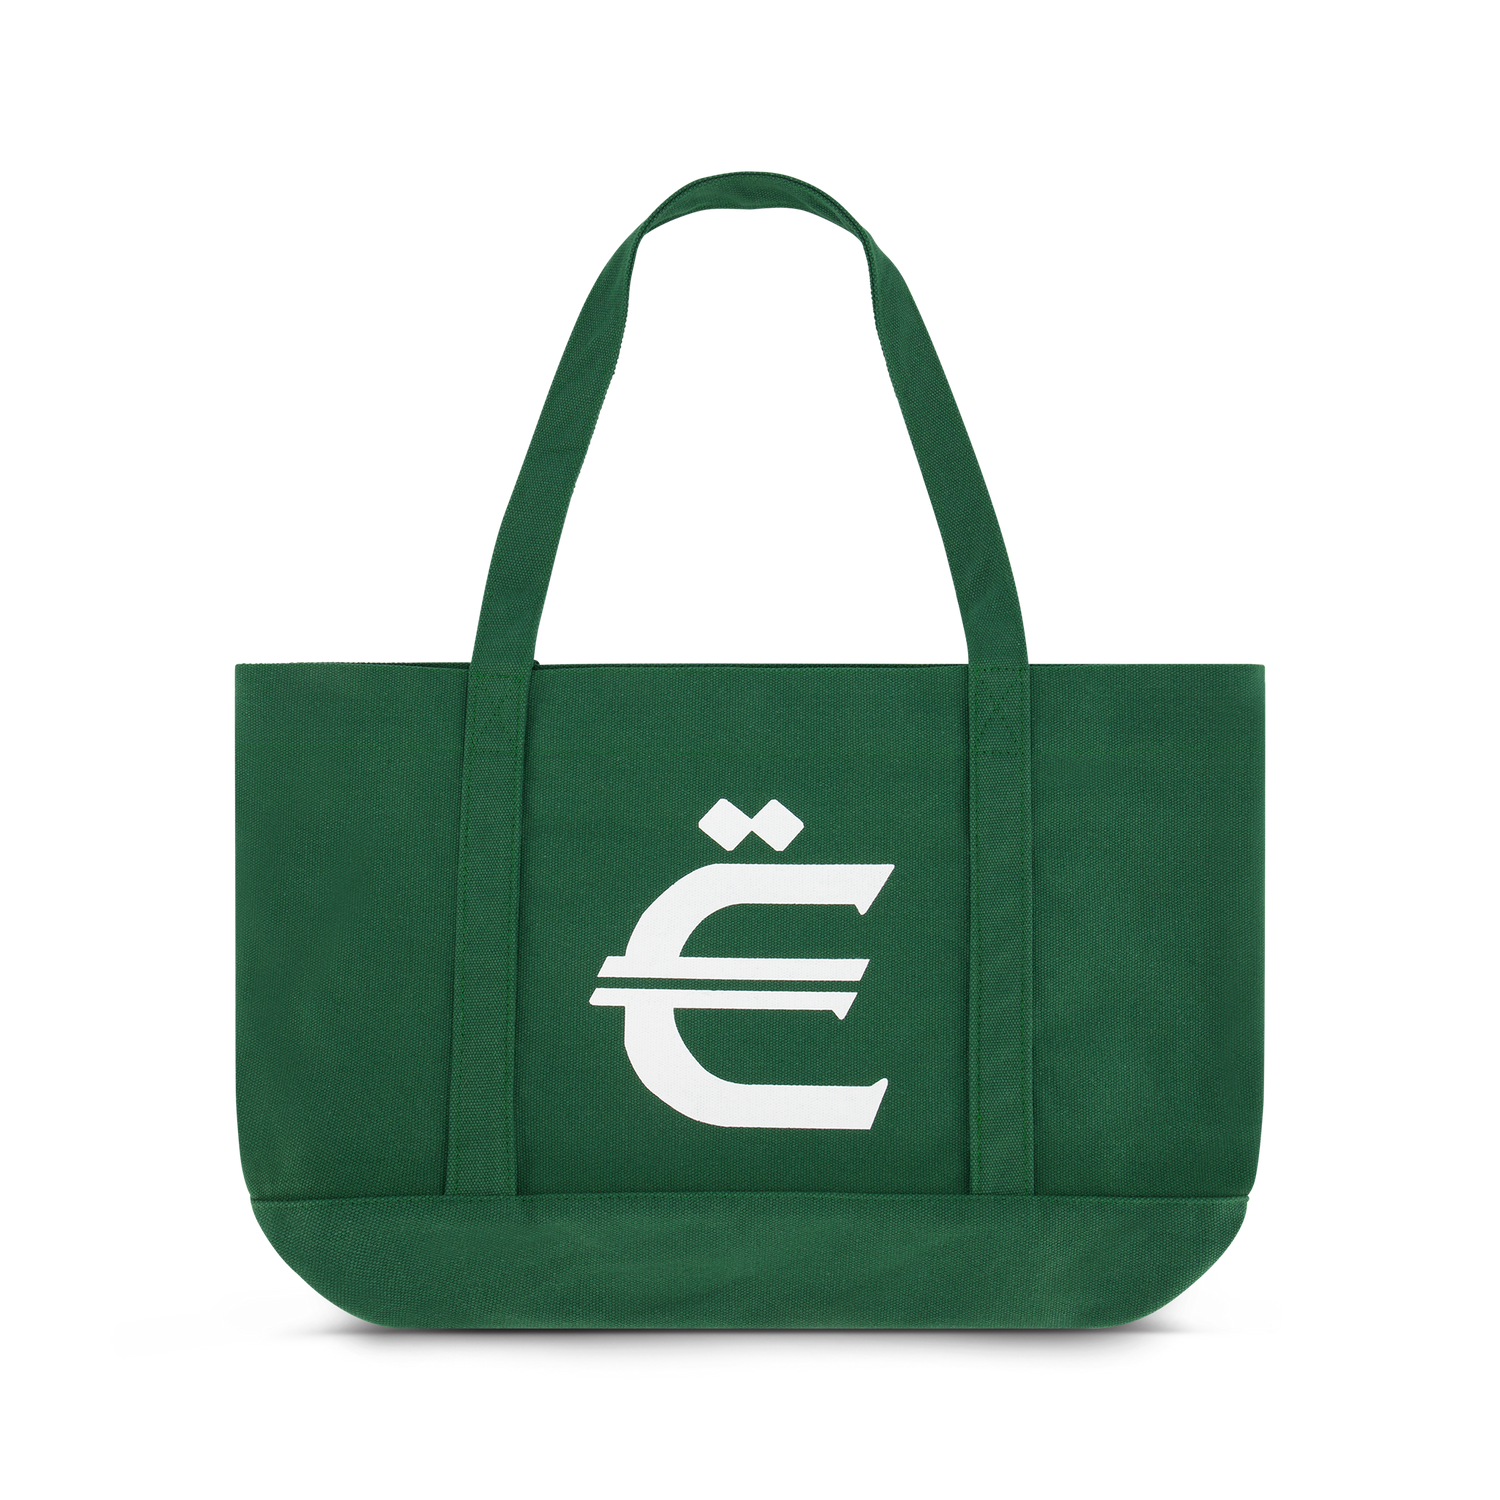 Forest Green Tote Bag - EXCLSV